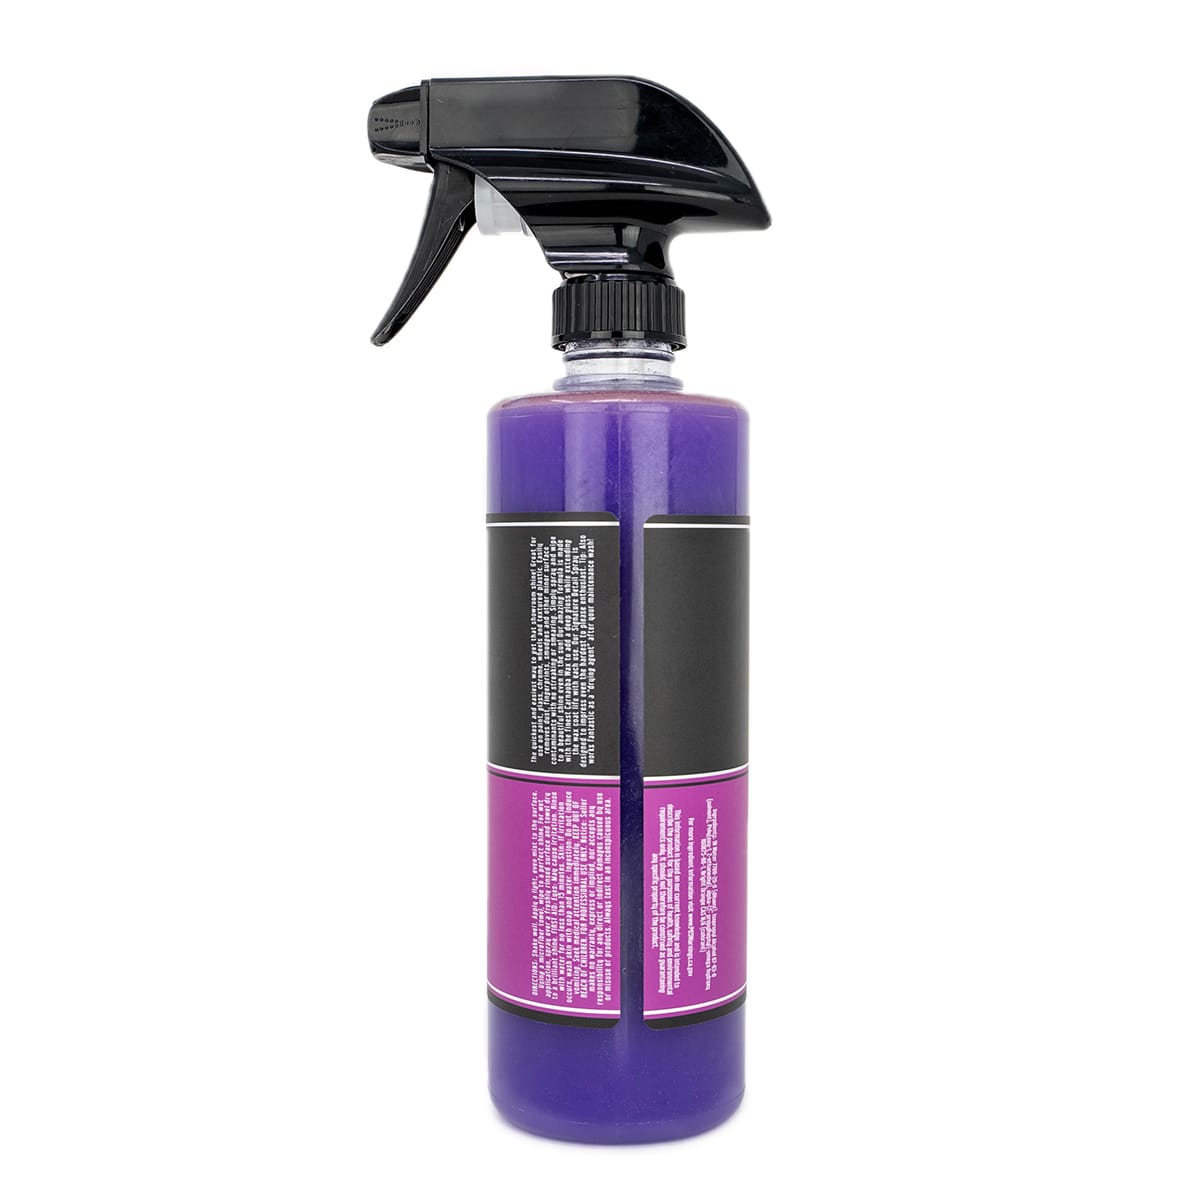 Grape Gloss Polymer Spray Wax Detailer - Flash Auto Detailing Products % %